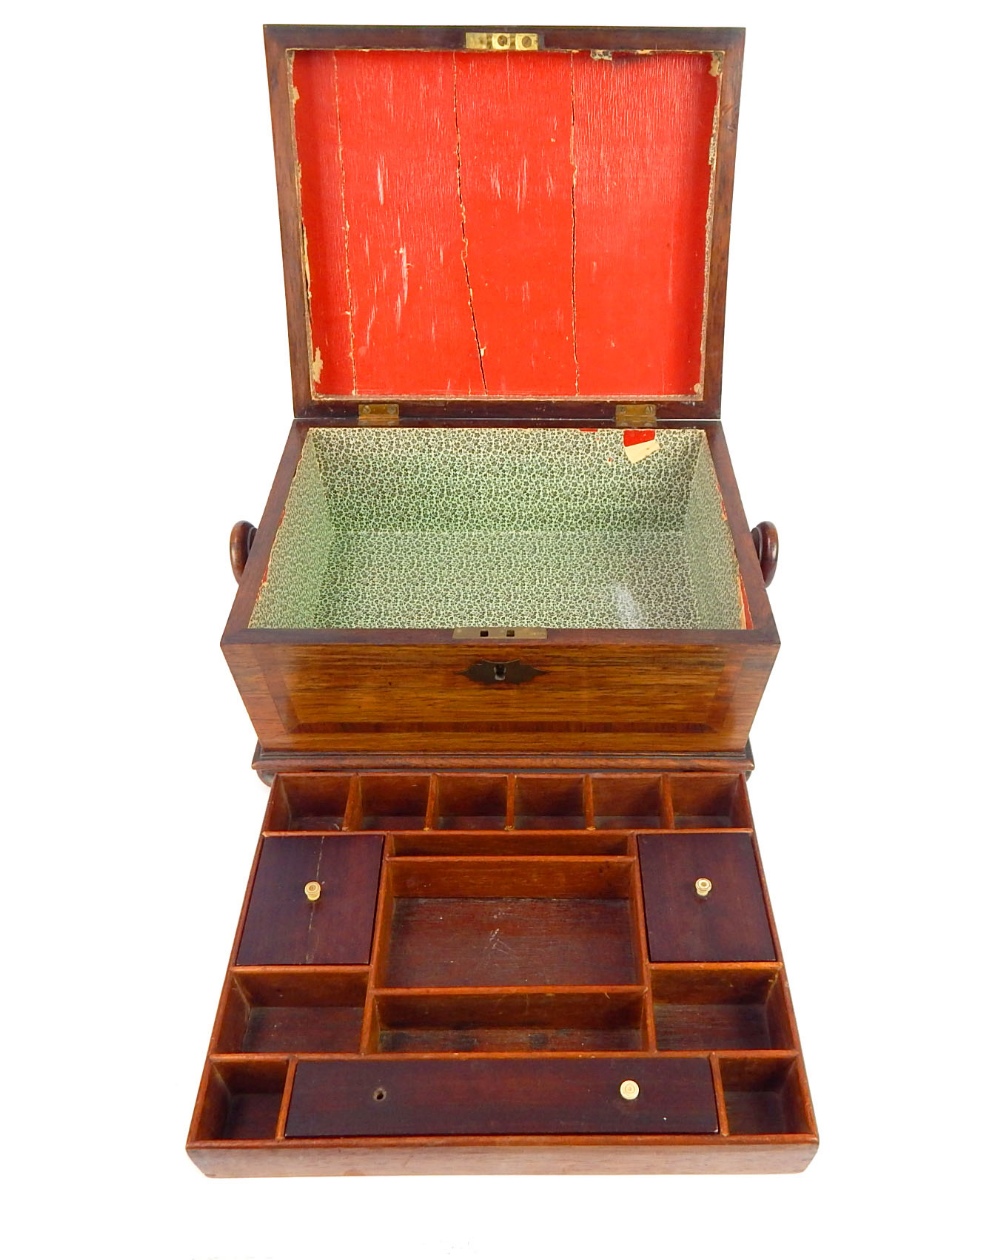 French Empire sewing box, rosewood, brass tablet to E Dix 1831, turned handles, fitted tray, bun - Image 7 of 8